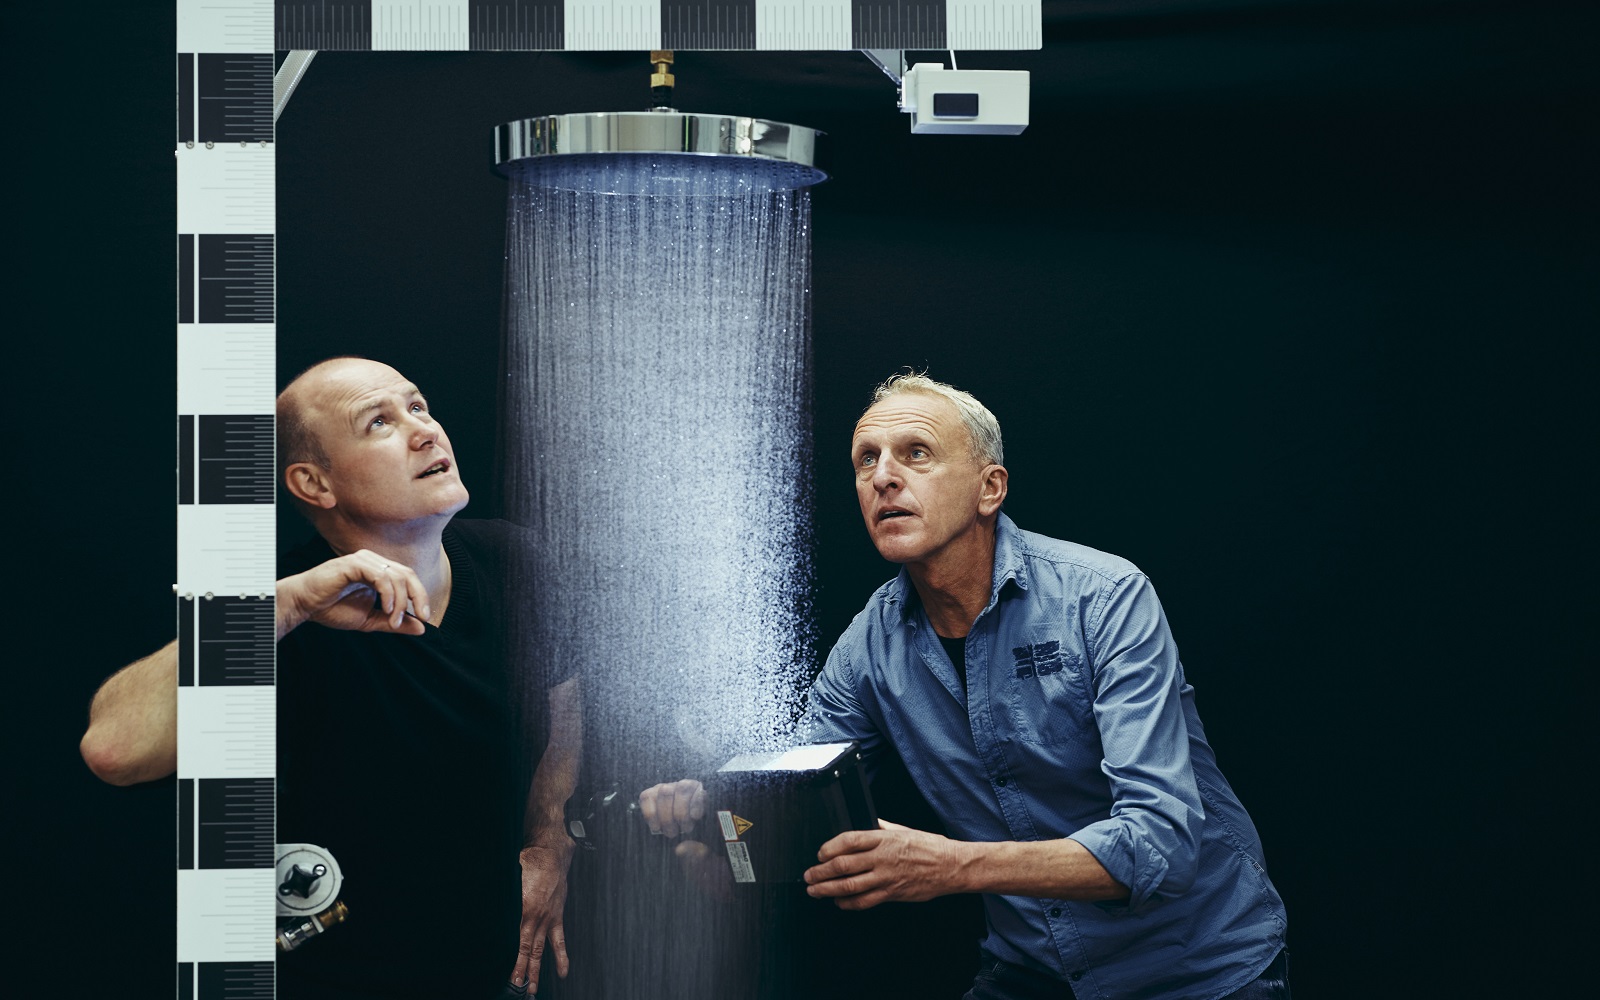 hansgrohe measuring water and sustainability